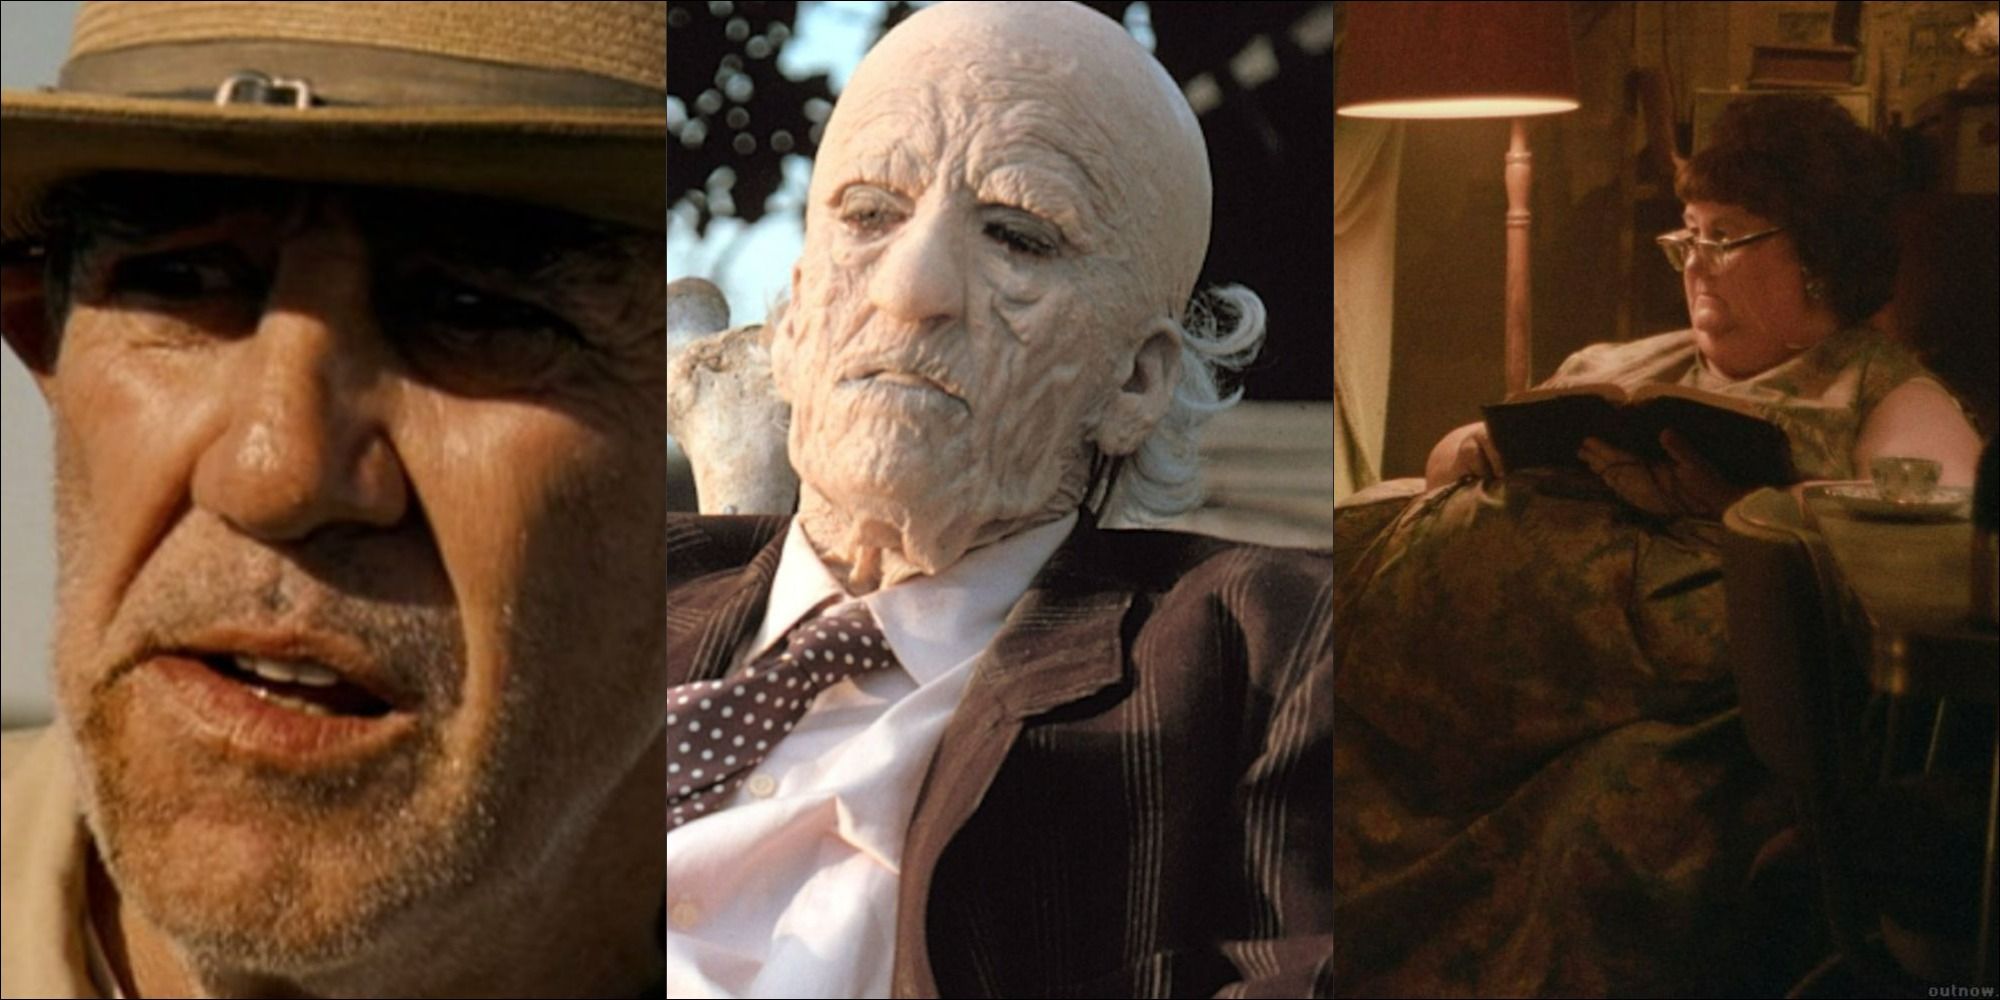 Three villains from The Texas Chain Saw Massacre franchise